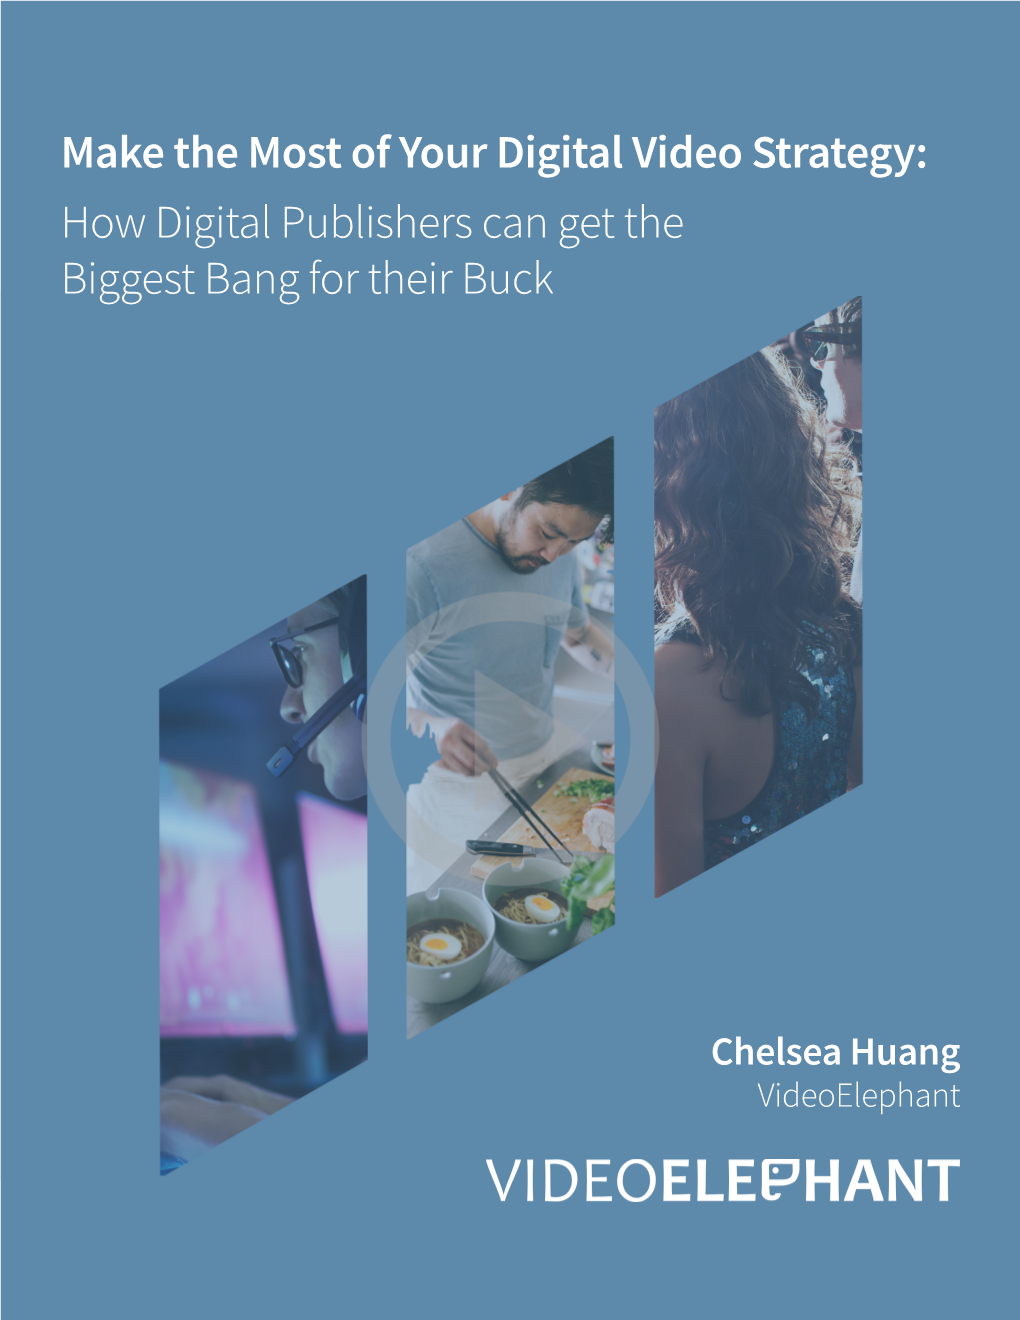 Make the Most of Your Digital Video Strategy: How Digital Publishers Can Get the Biggest Bang for Their Buck